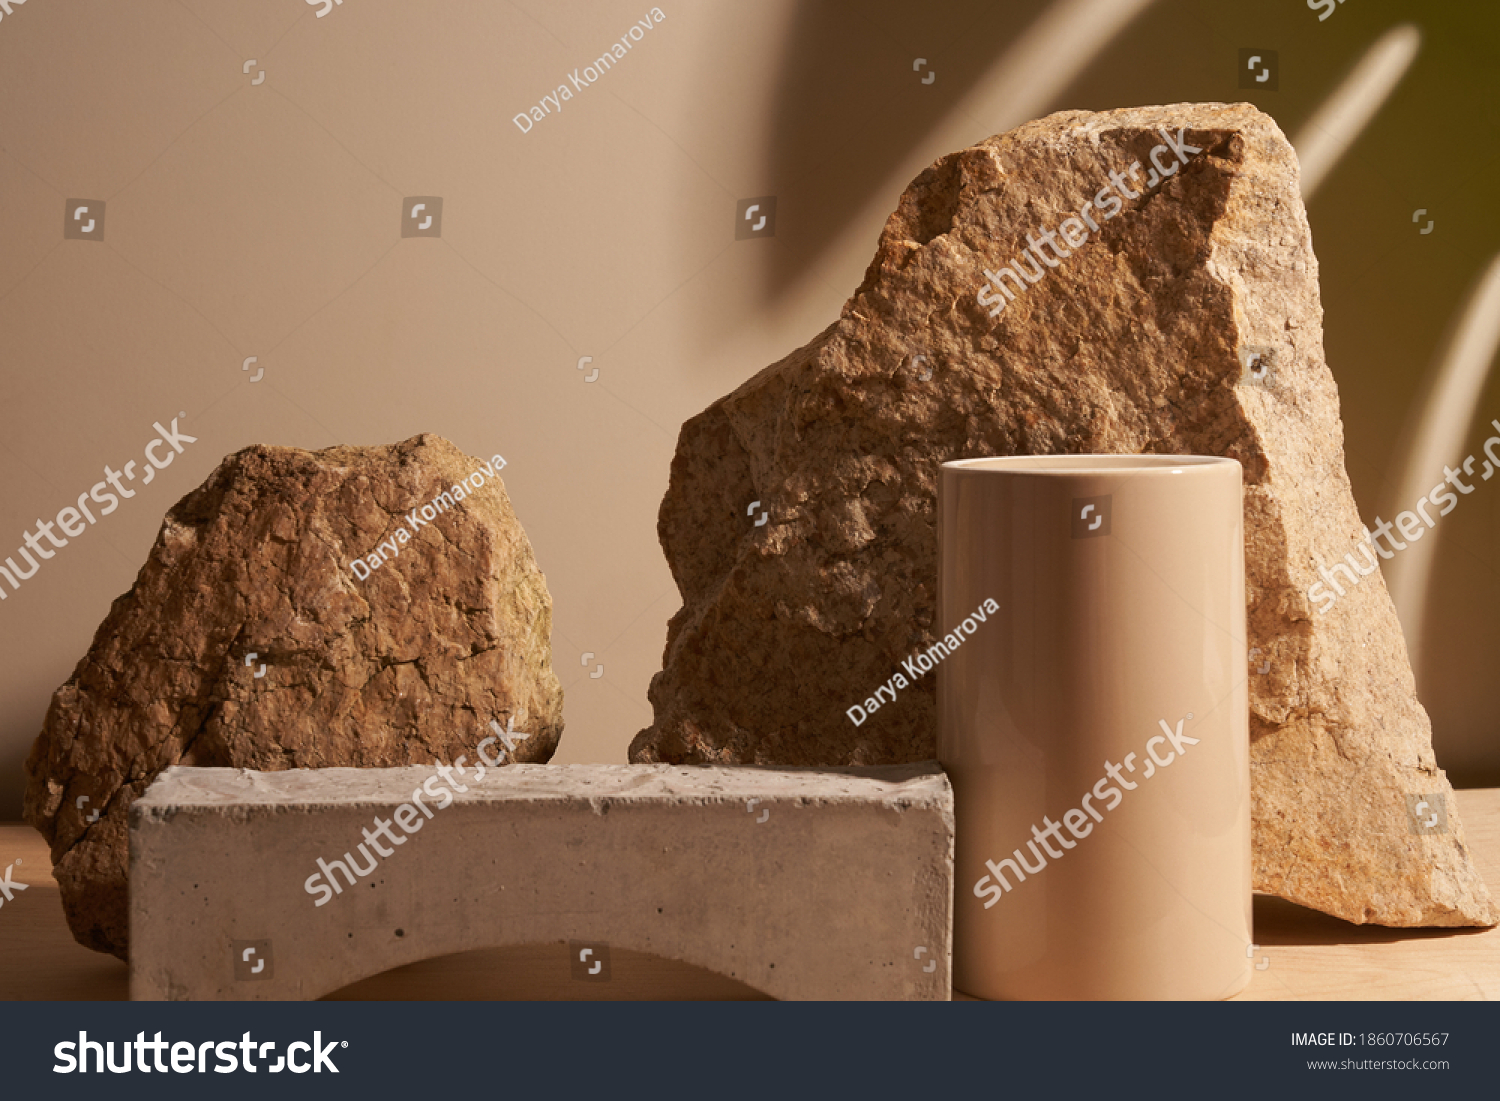 Beige stone and a piece of grey podium tile on a beige background, natural background with shadow of tropical plant for your product #1860706567